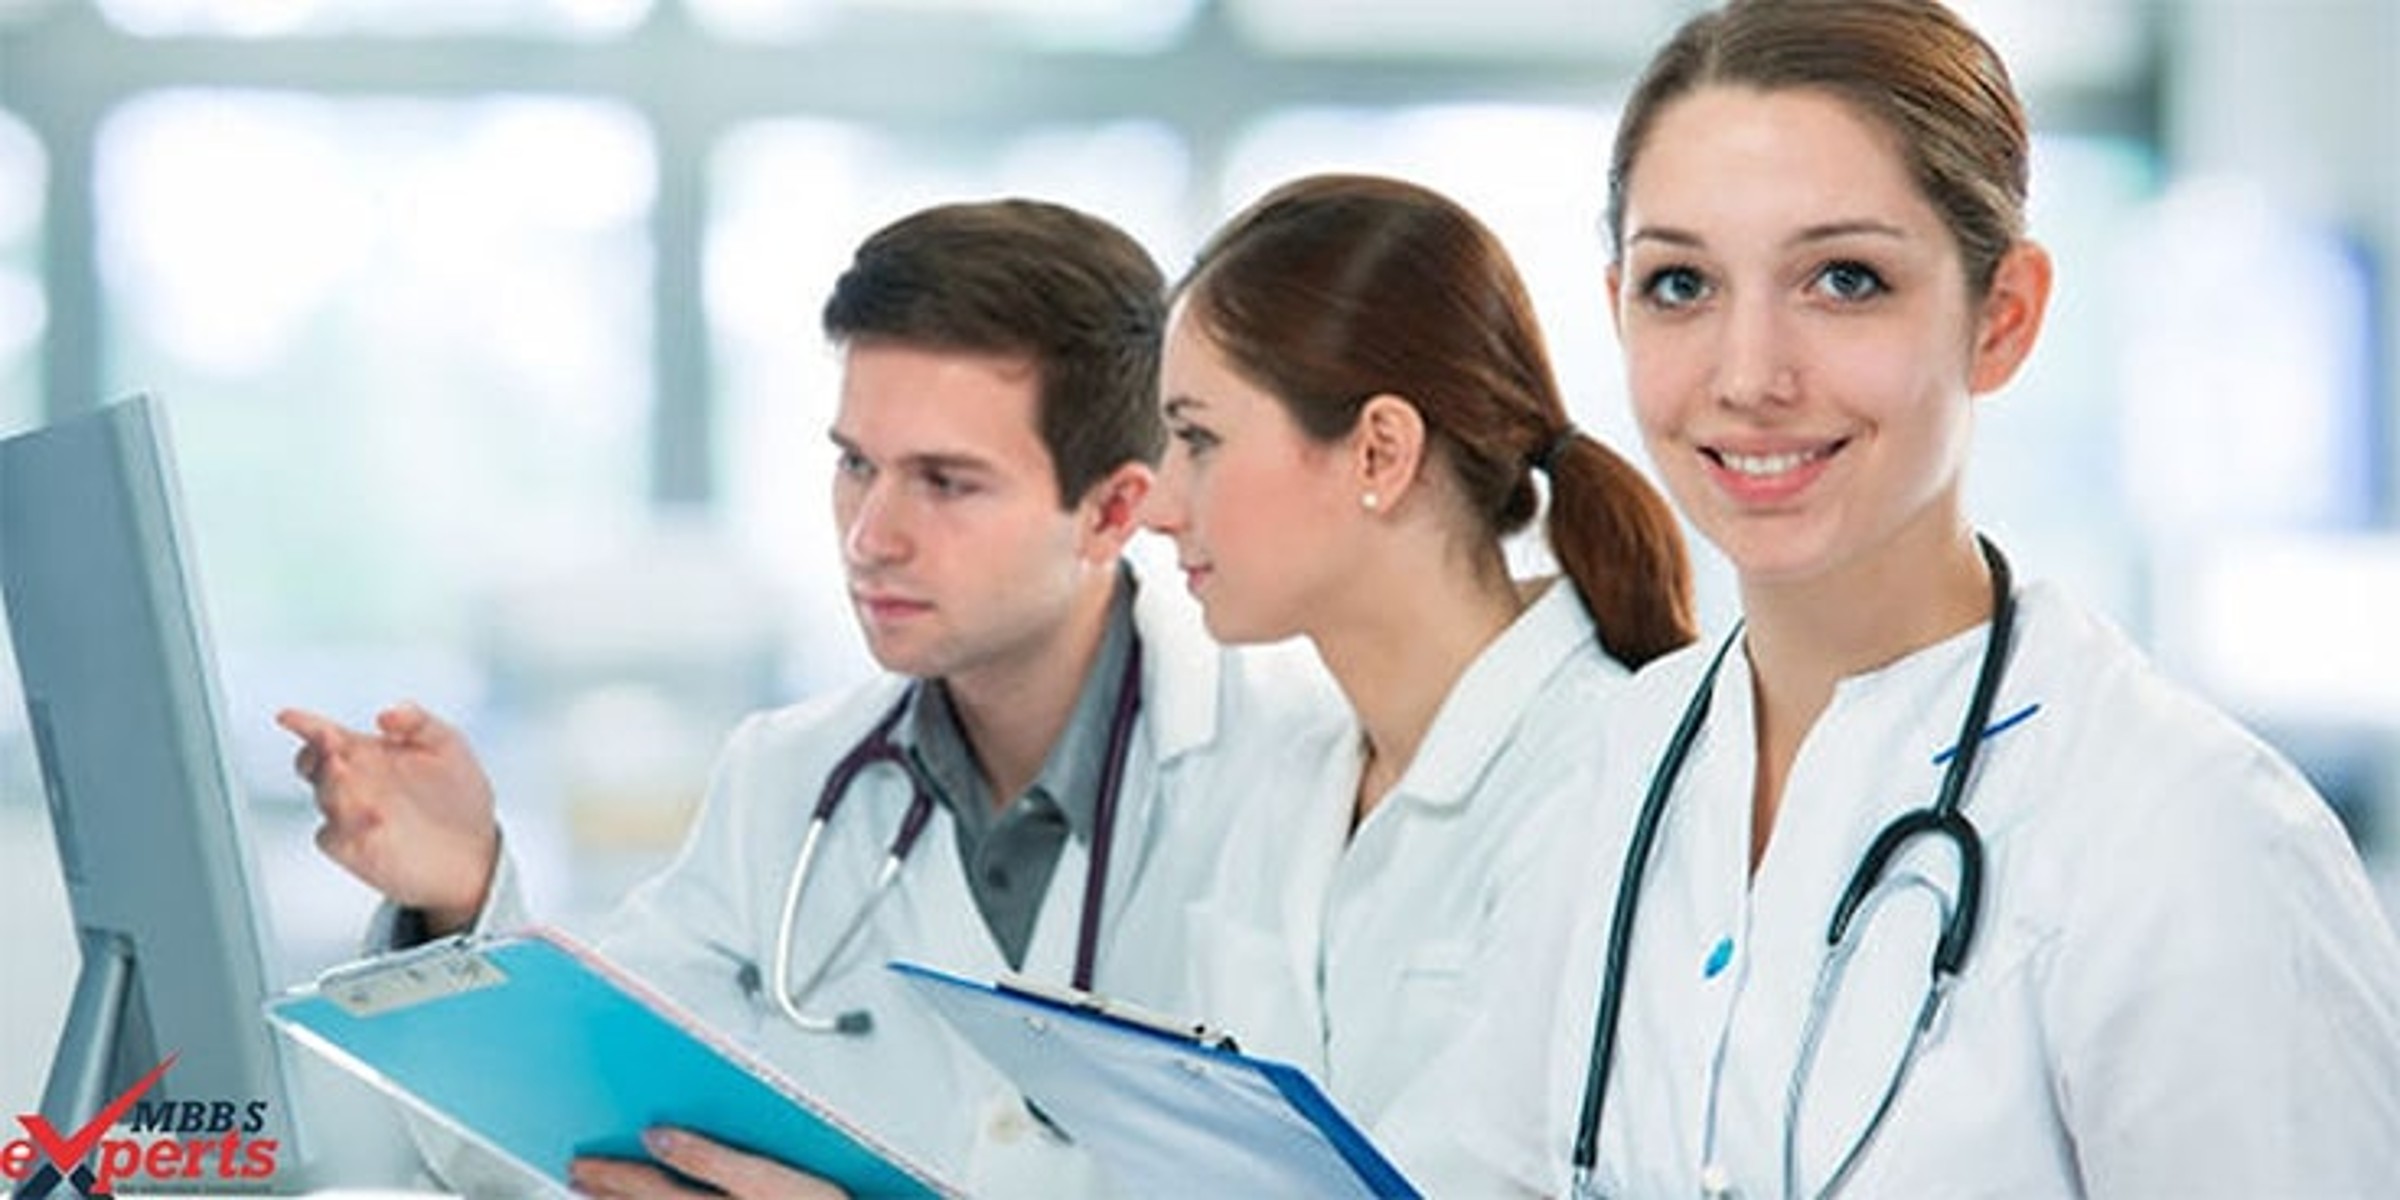 MBBS In Portugal: Entry Requirements, Free Tuition, Scholarships